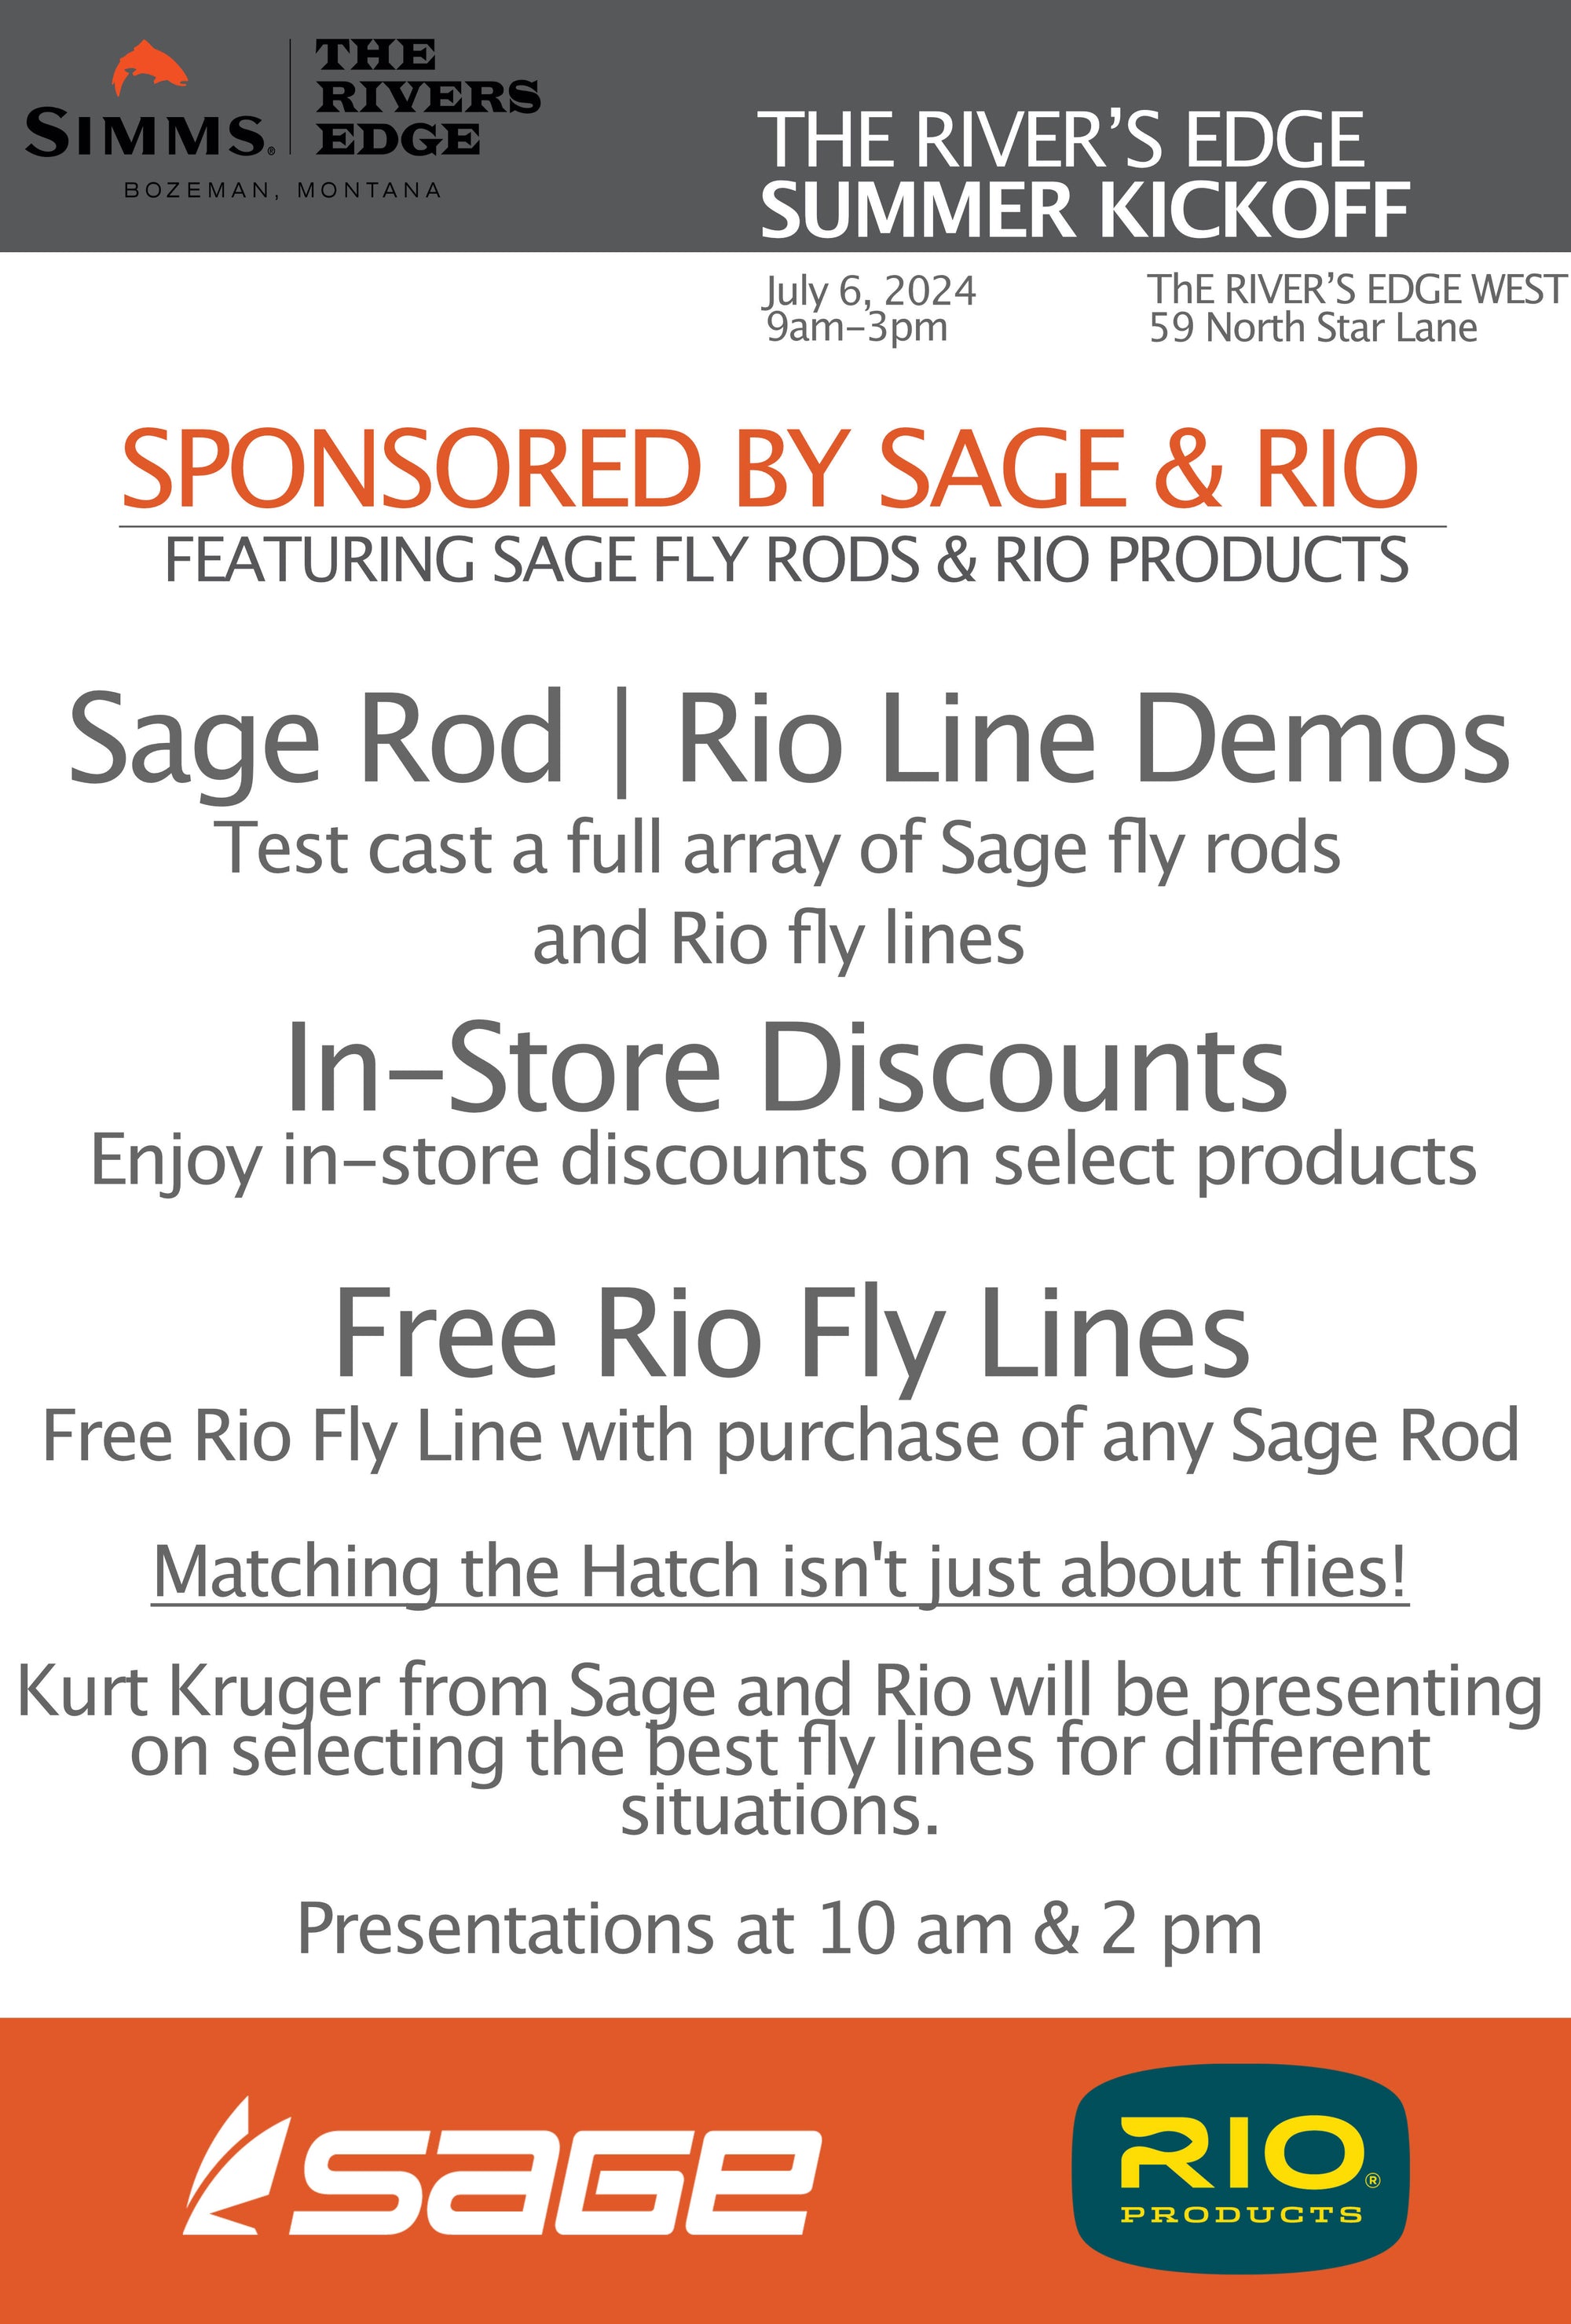 Summer Kickoff Event with Sage and Rio